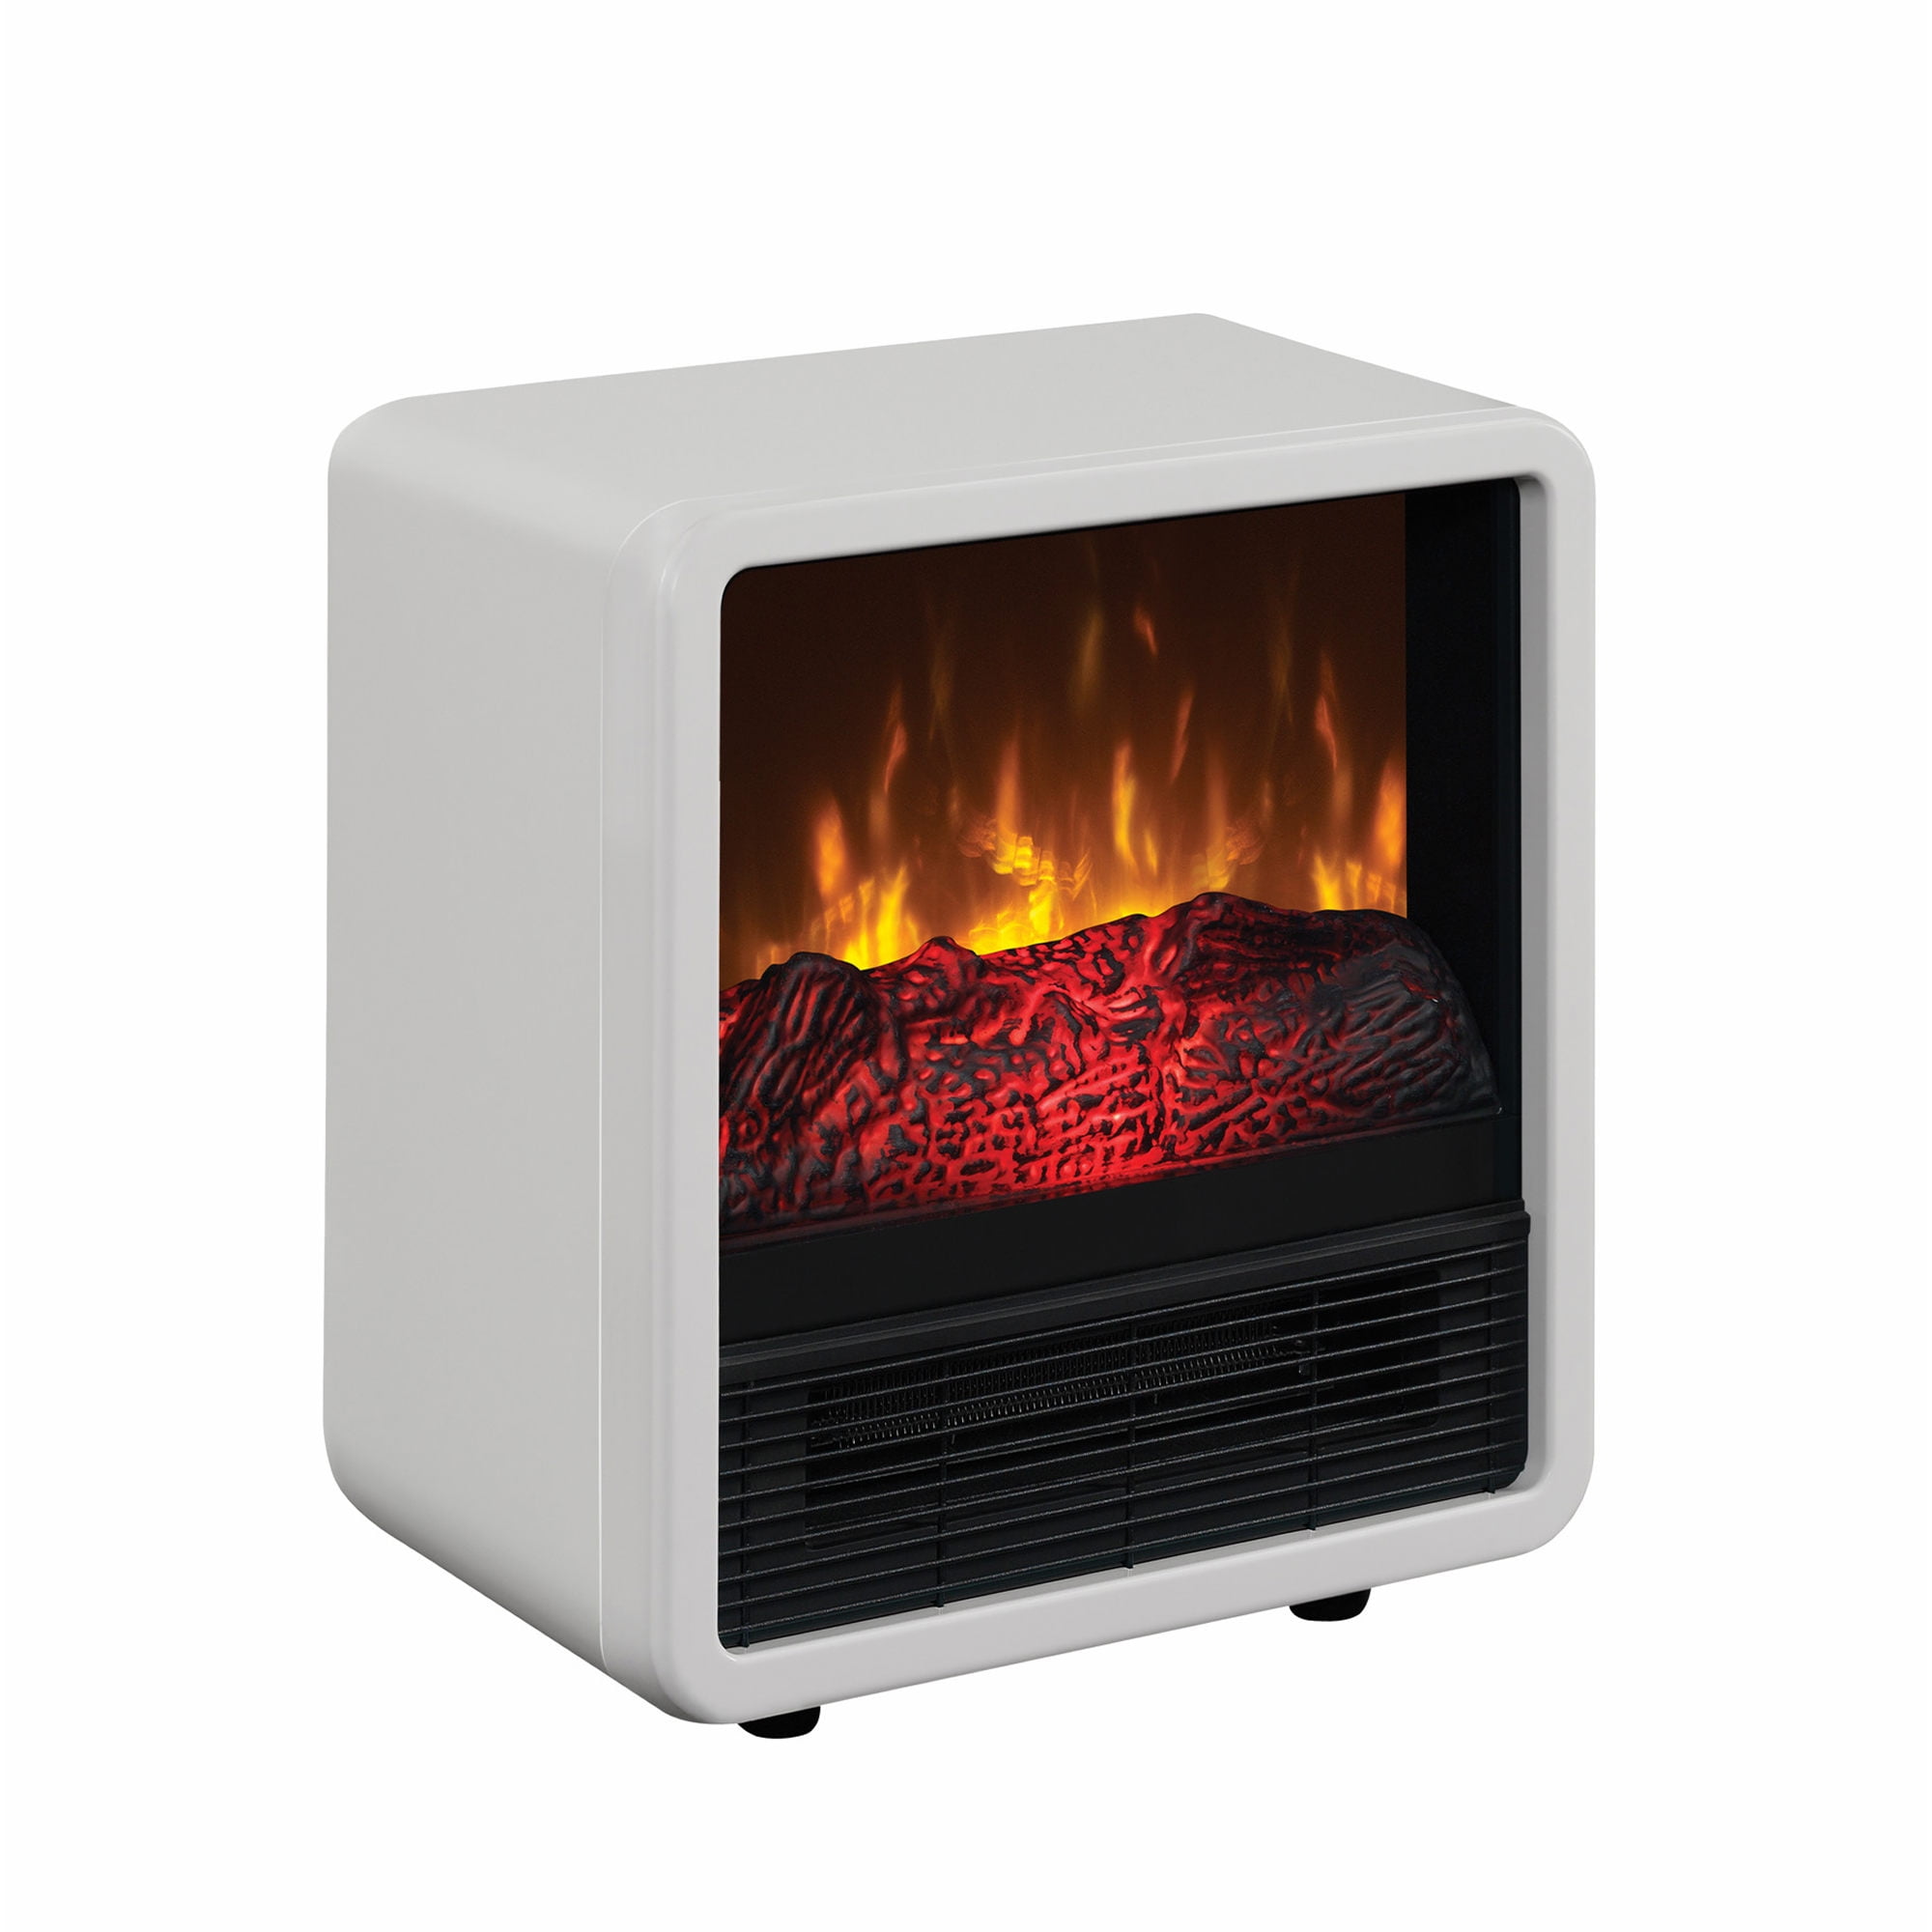 Duraflame Personal Fire Cube Electric, White Tabletop Electric Fireplace